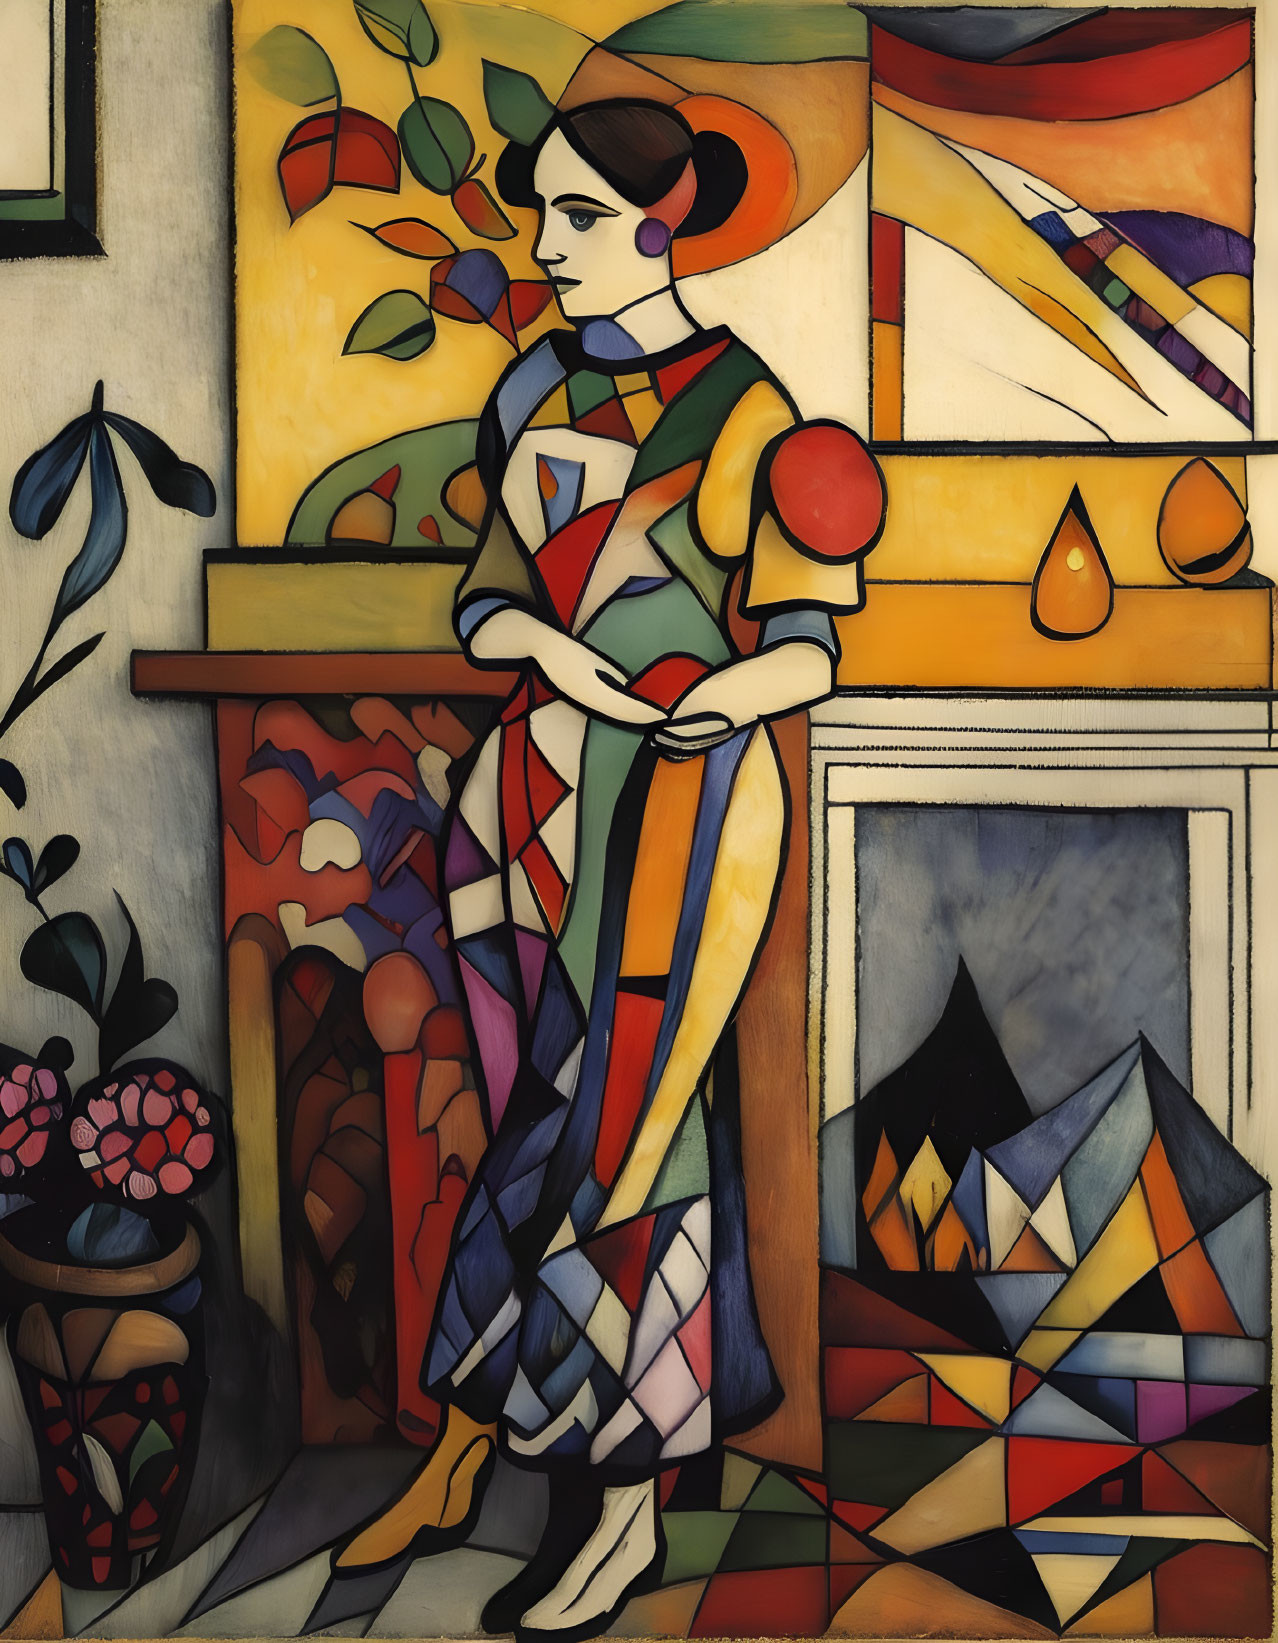 Abstract painting: Stylized female figure in geometric dress by fireplace